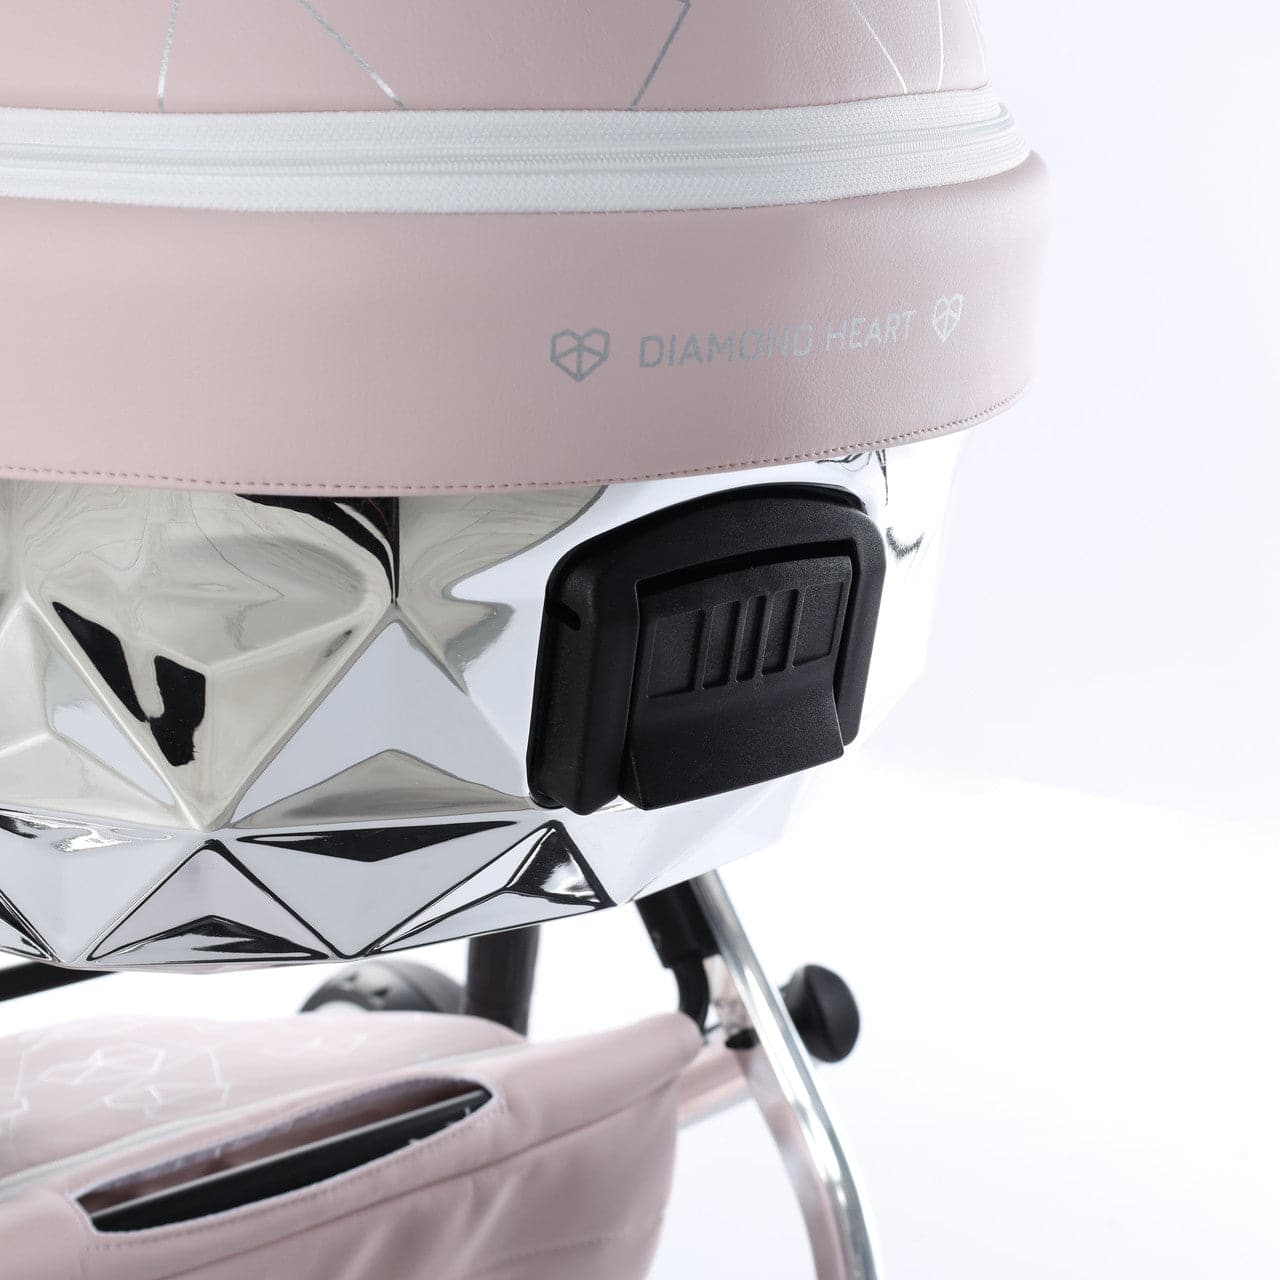 Junama Heart 3 In 1 Travel System - Pink - For Your Little One